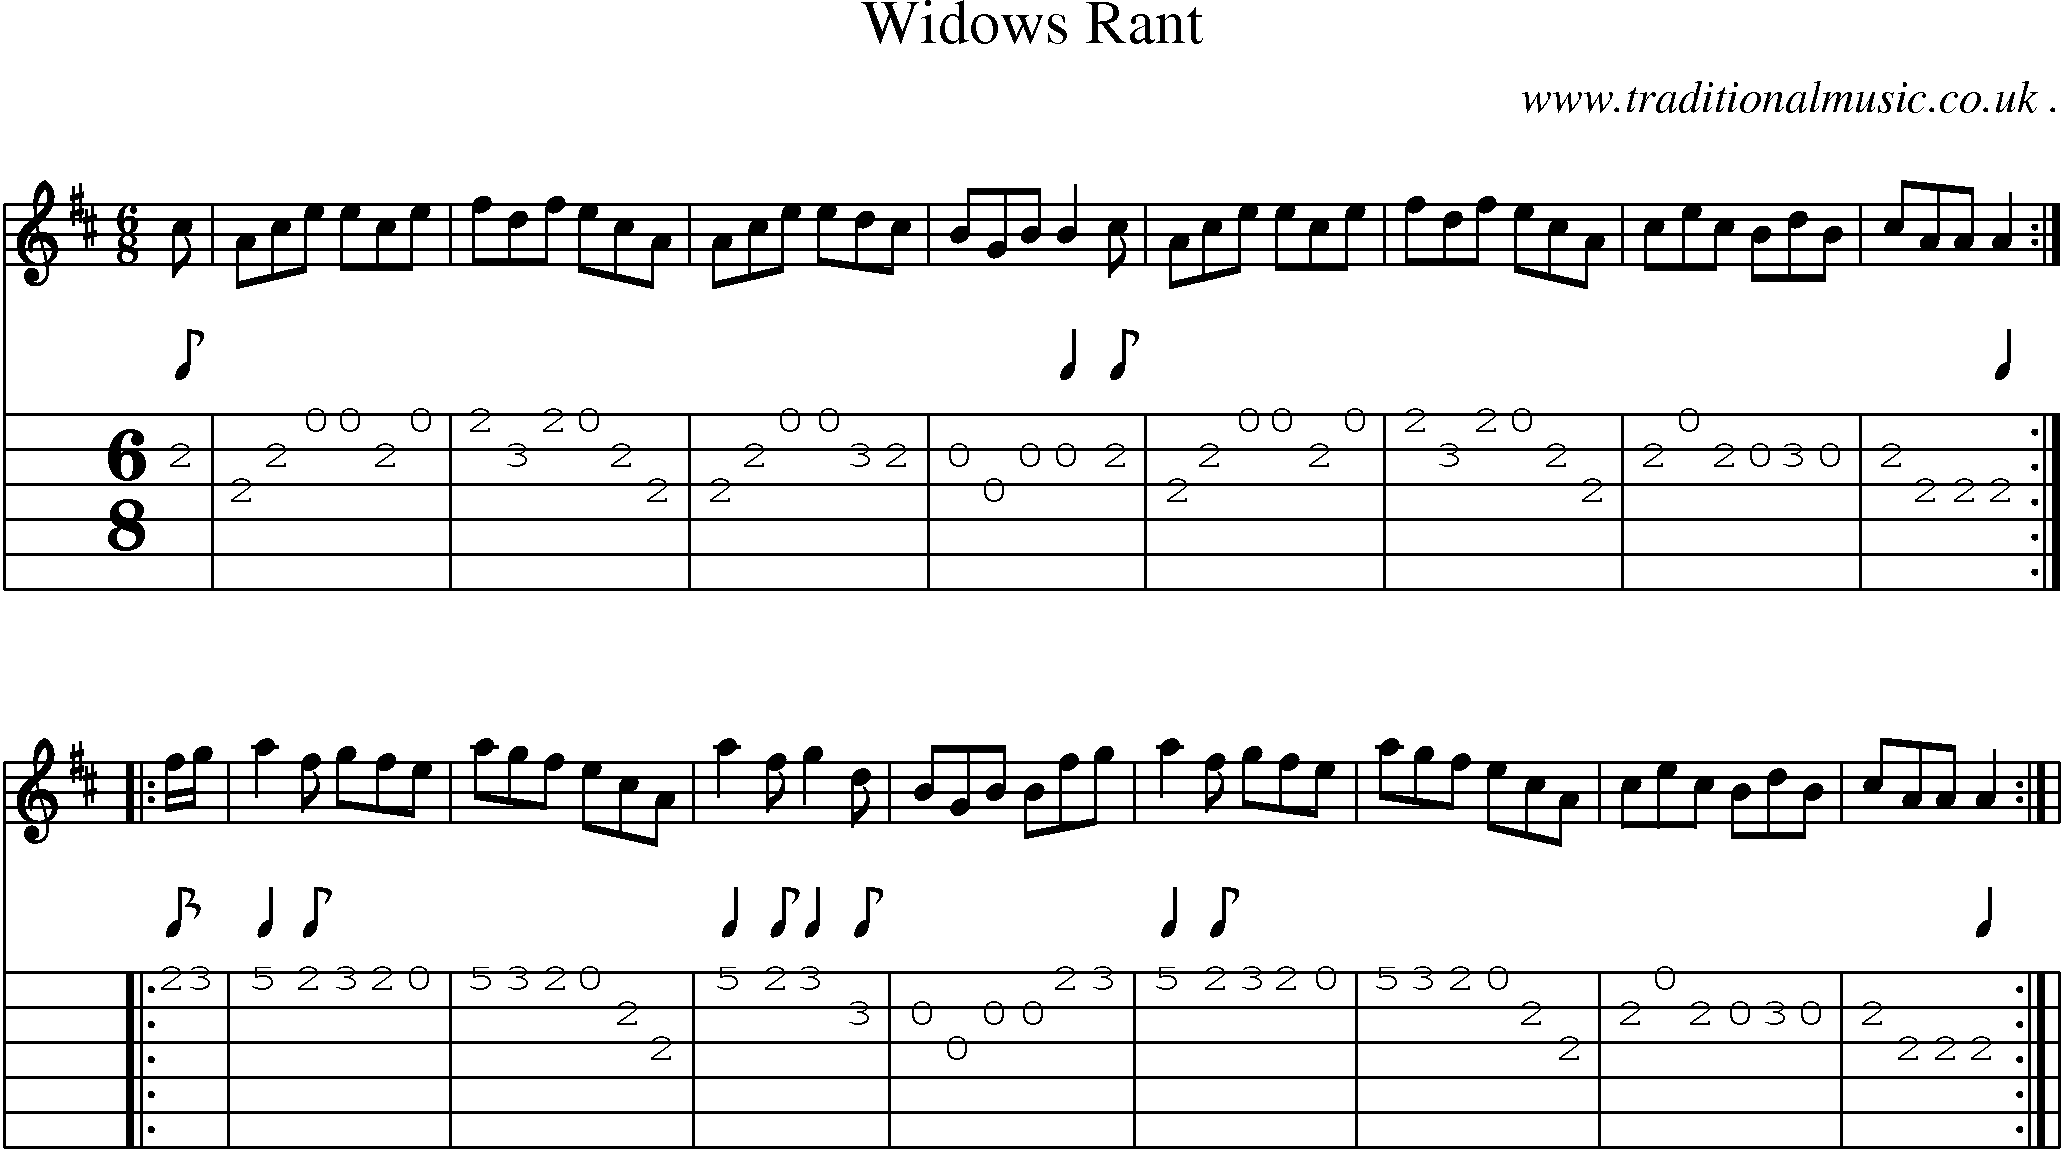 Sheet-Music and Guitar Tabs for Widows Rant